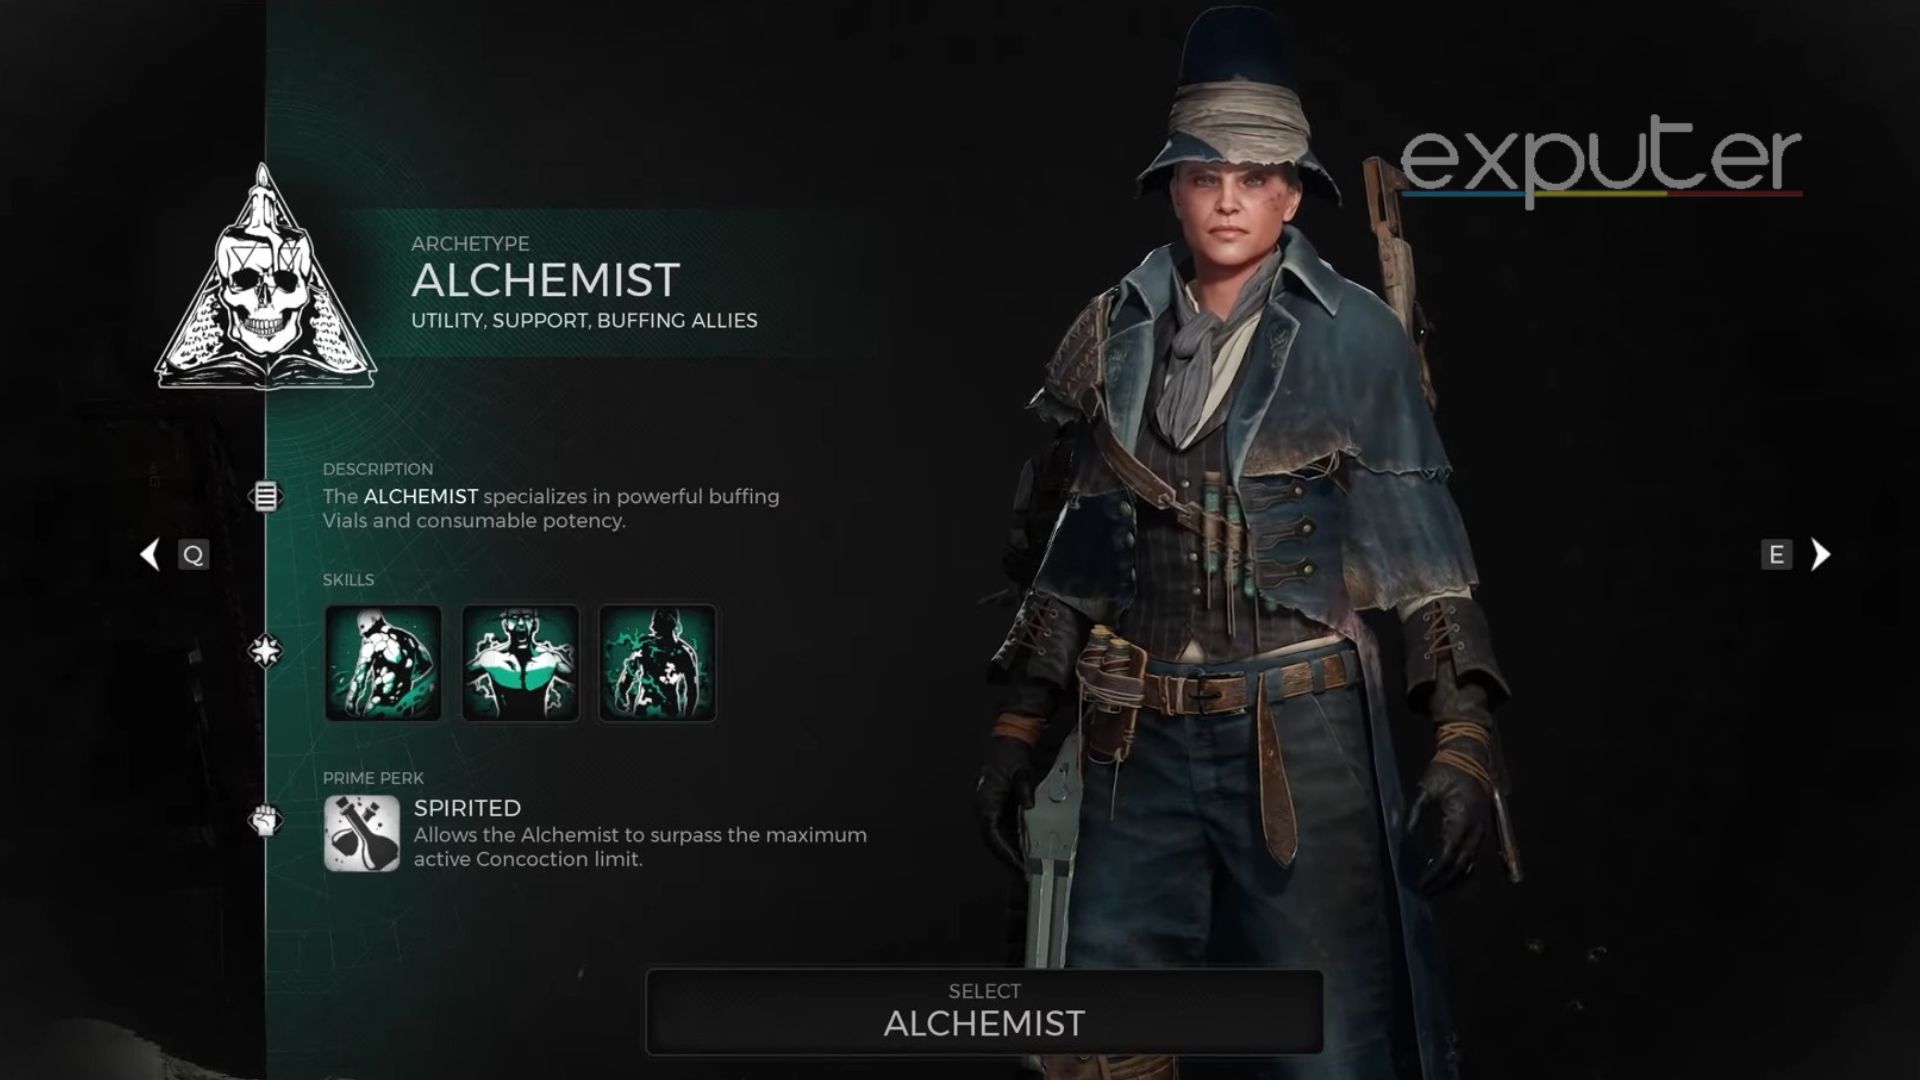 The Alchemist Archetype in Remnant 2